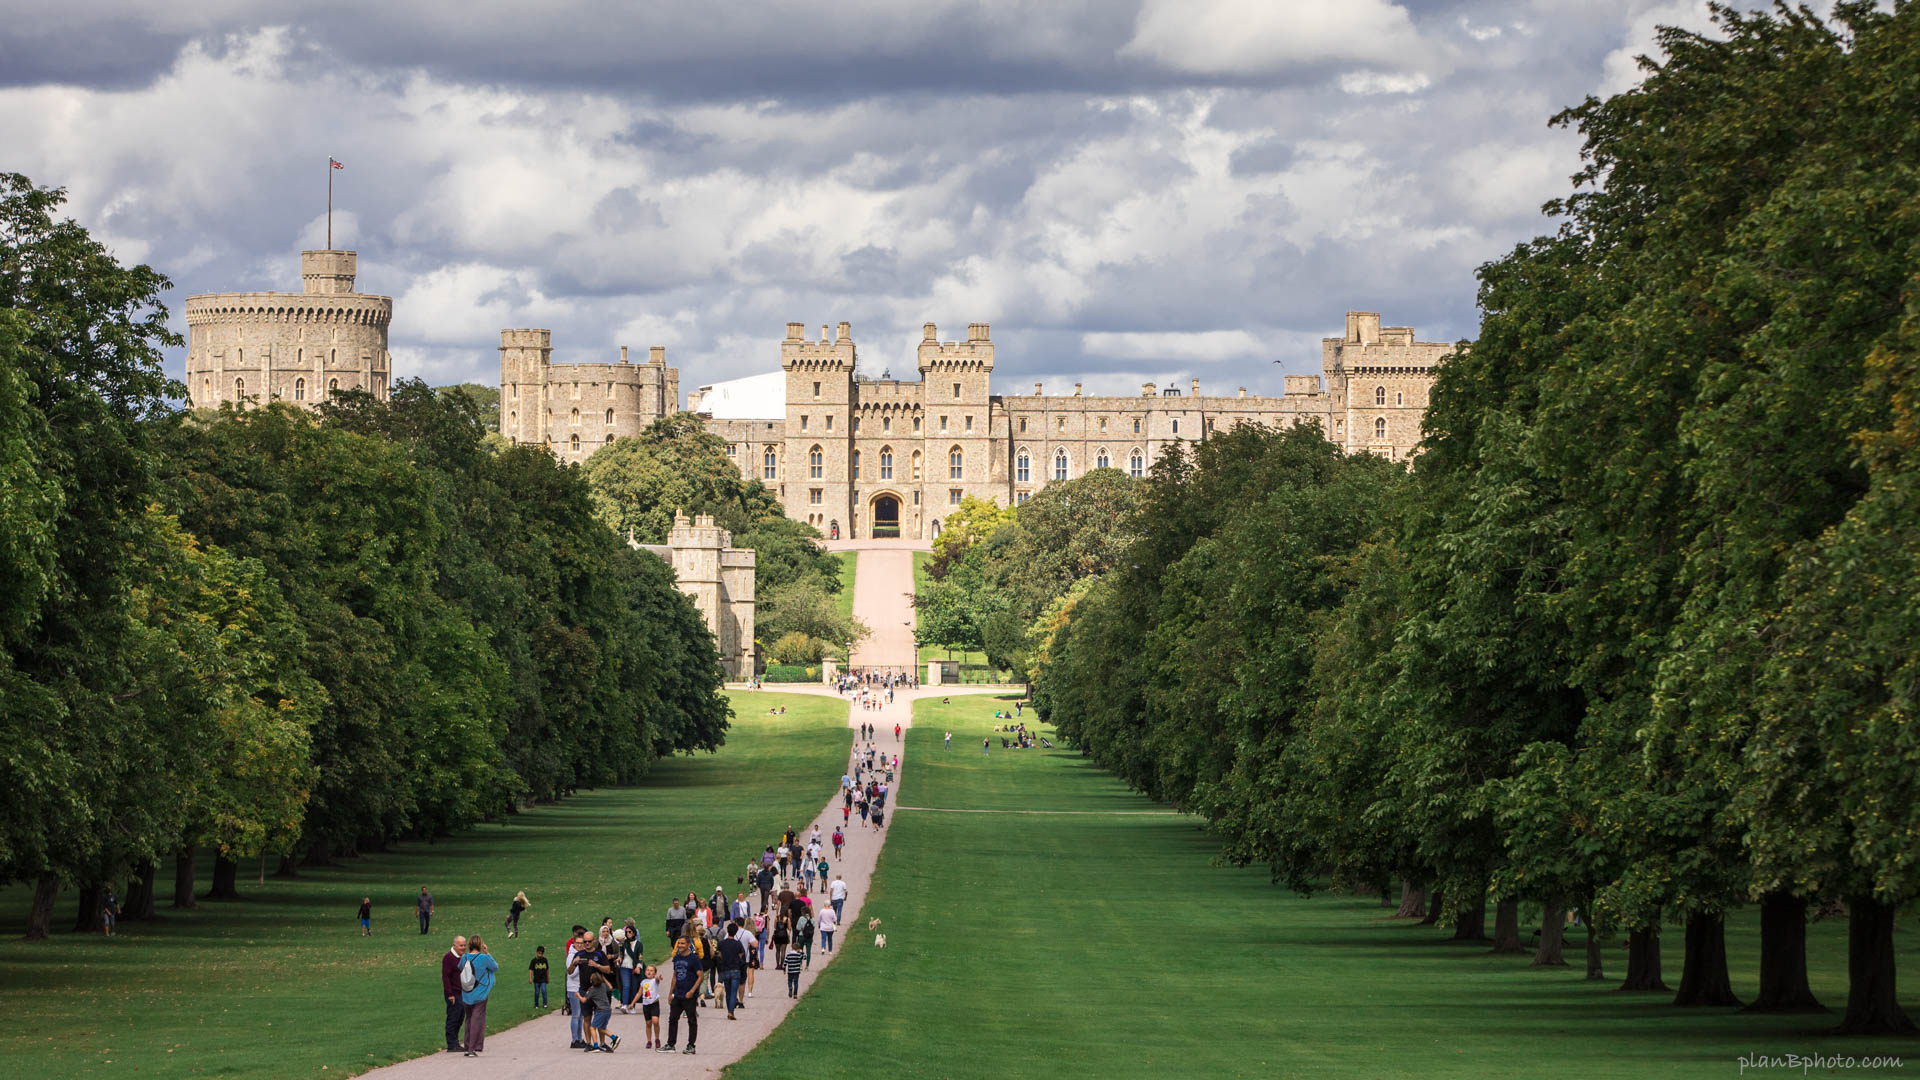 Photography location for Windsor Castle